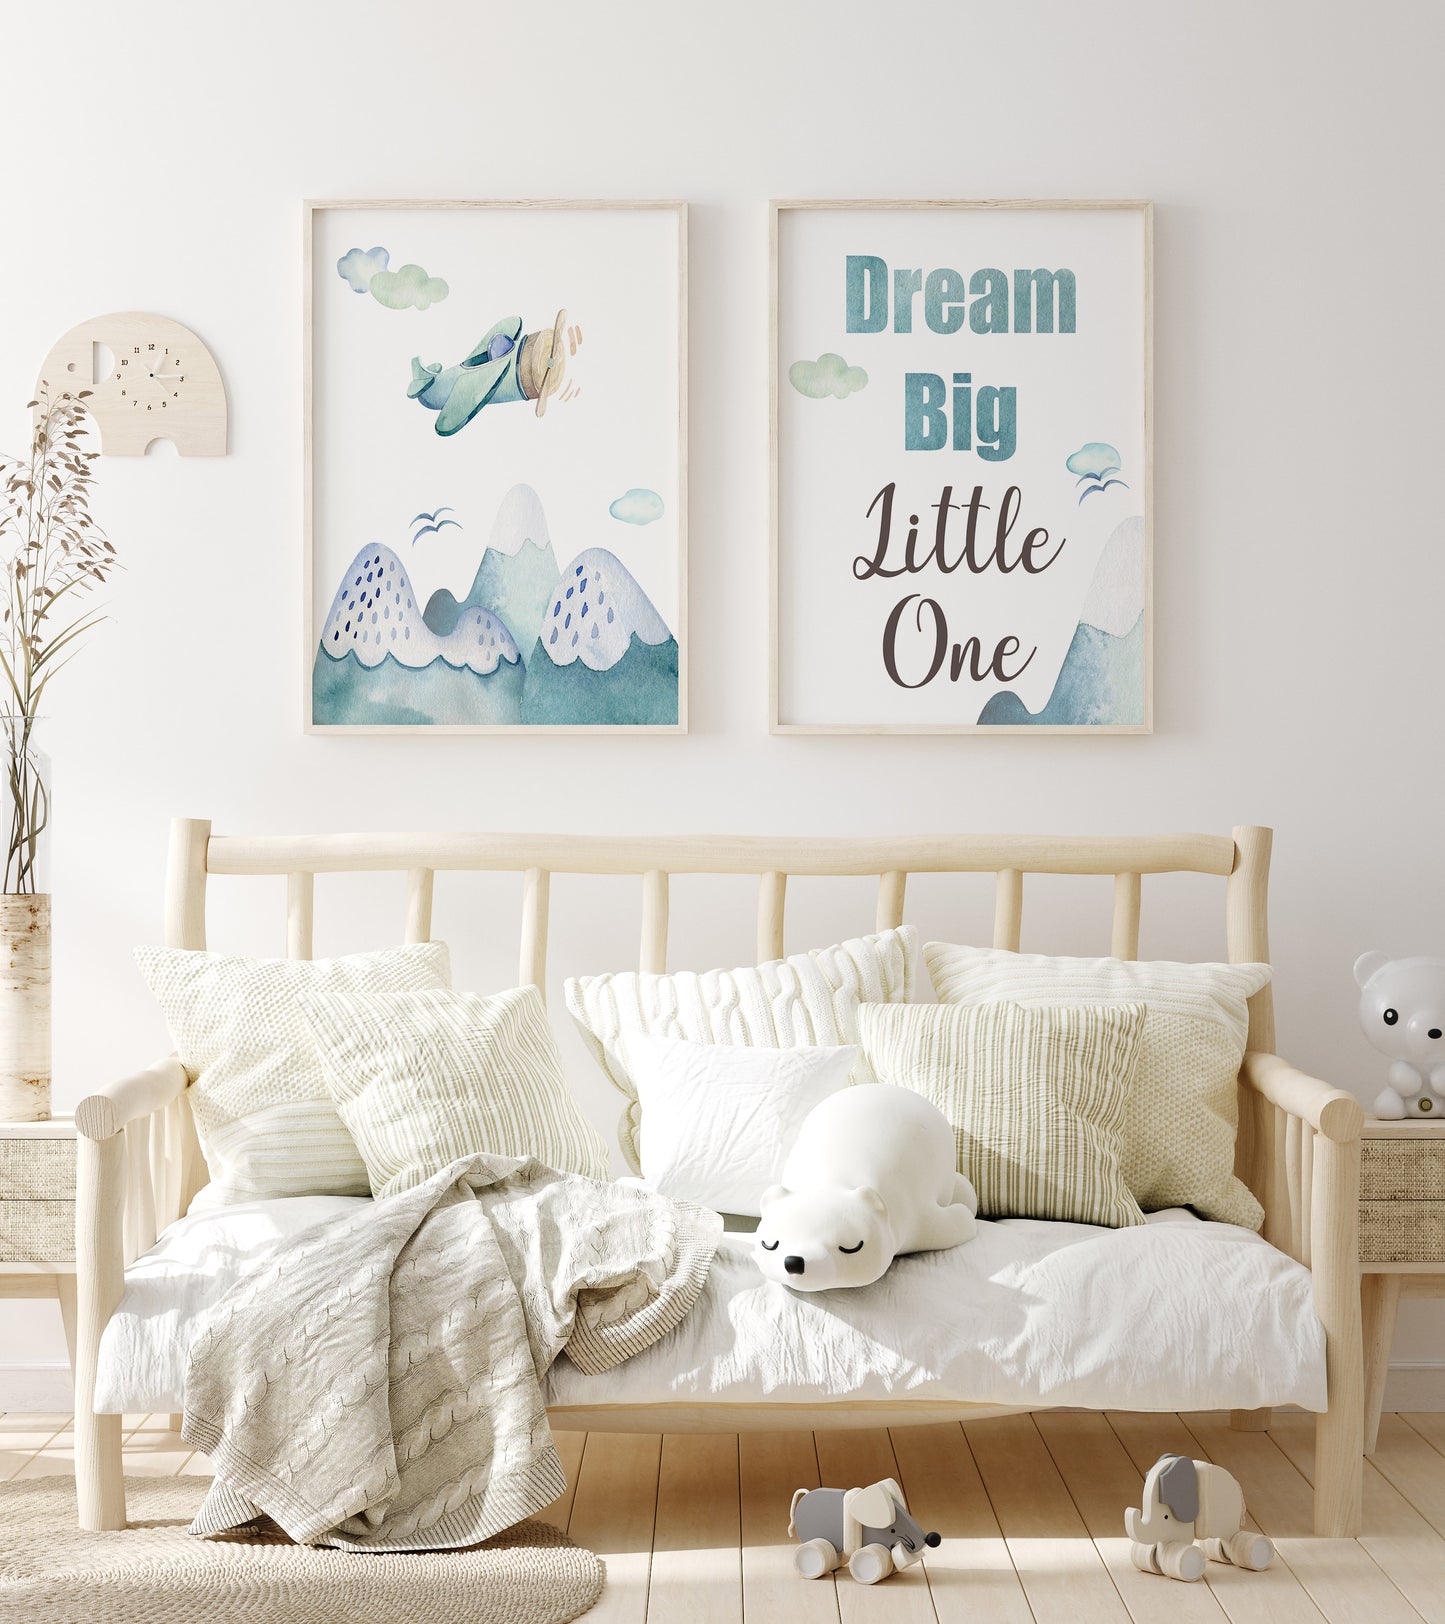 Dream Big Little One Printable Wall Art, Airplane Nursery Prints Set of 2 - Up in The Sky